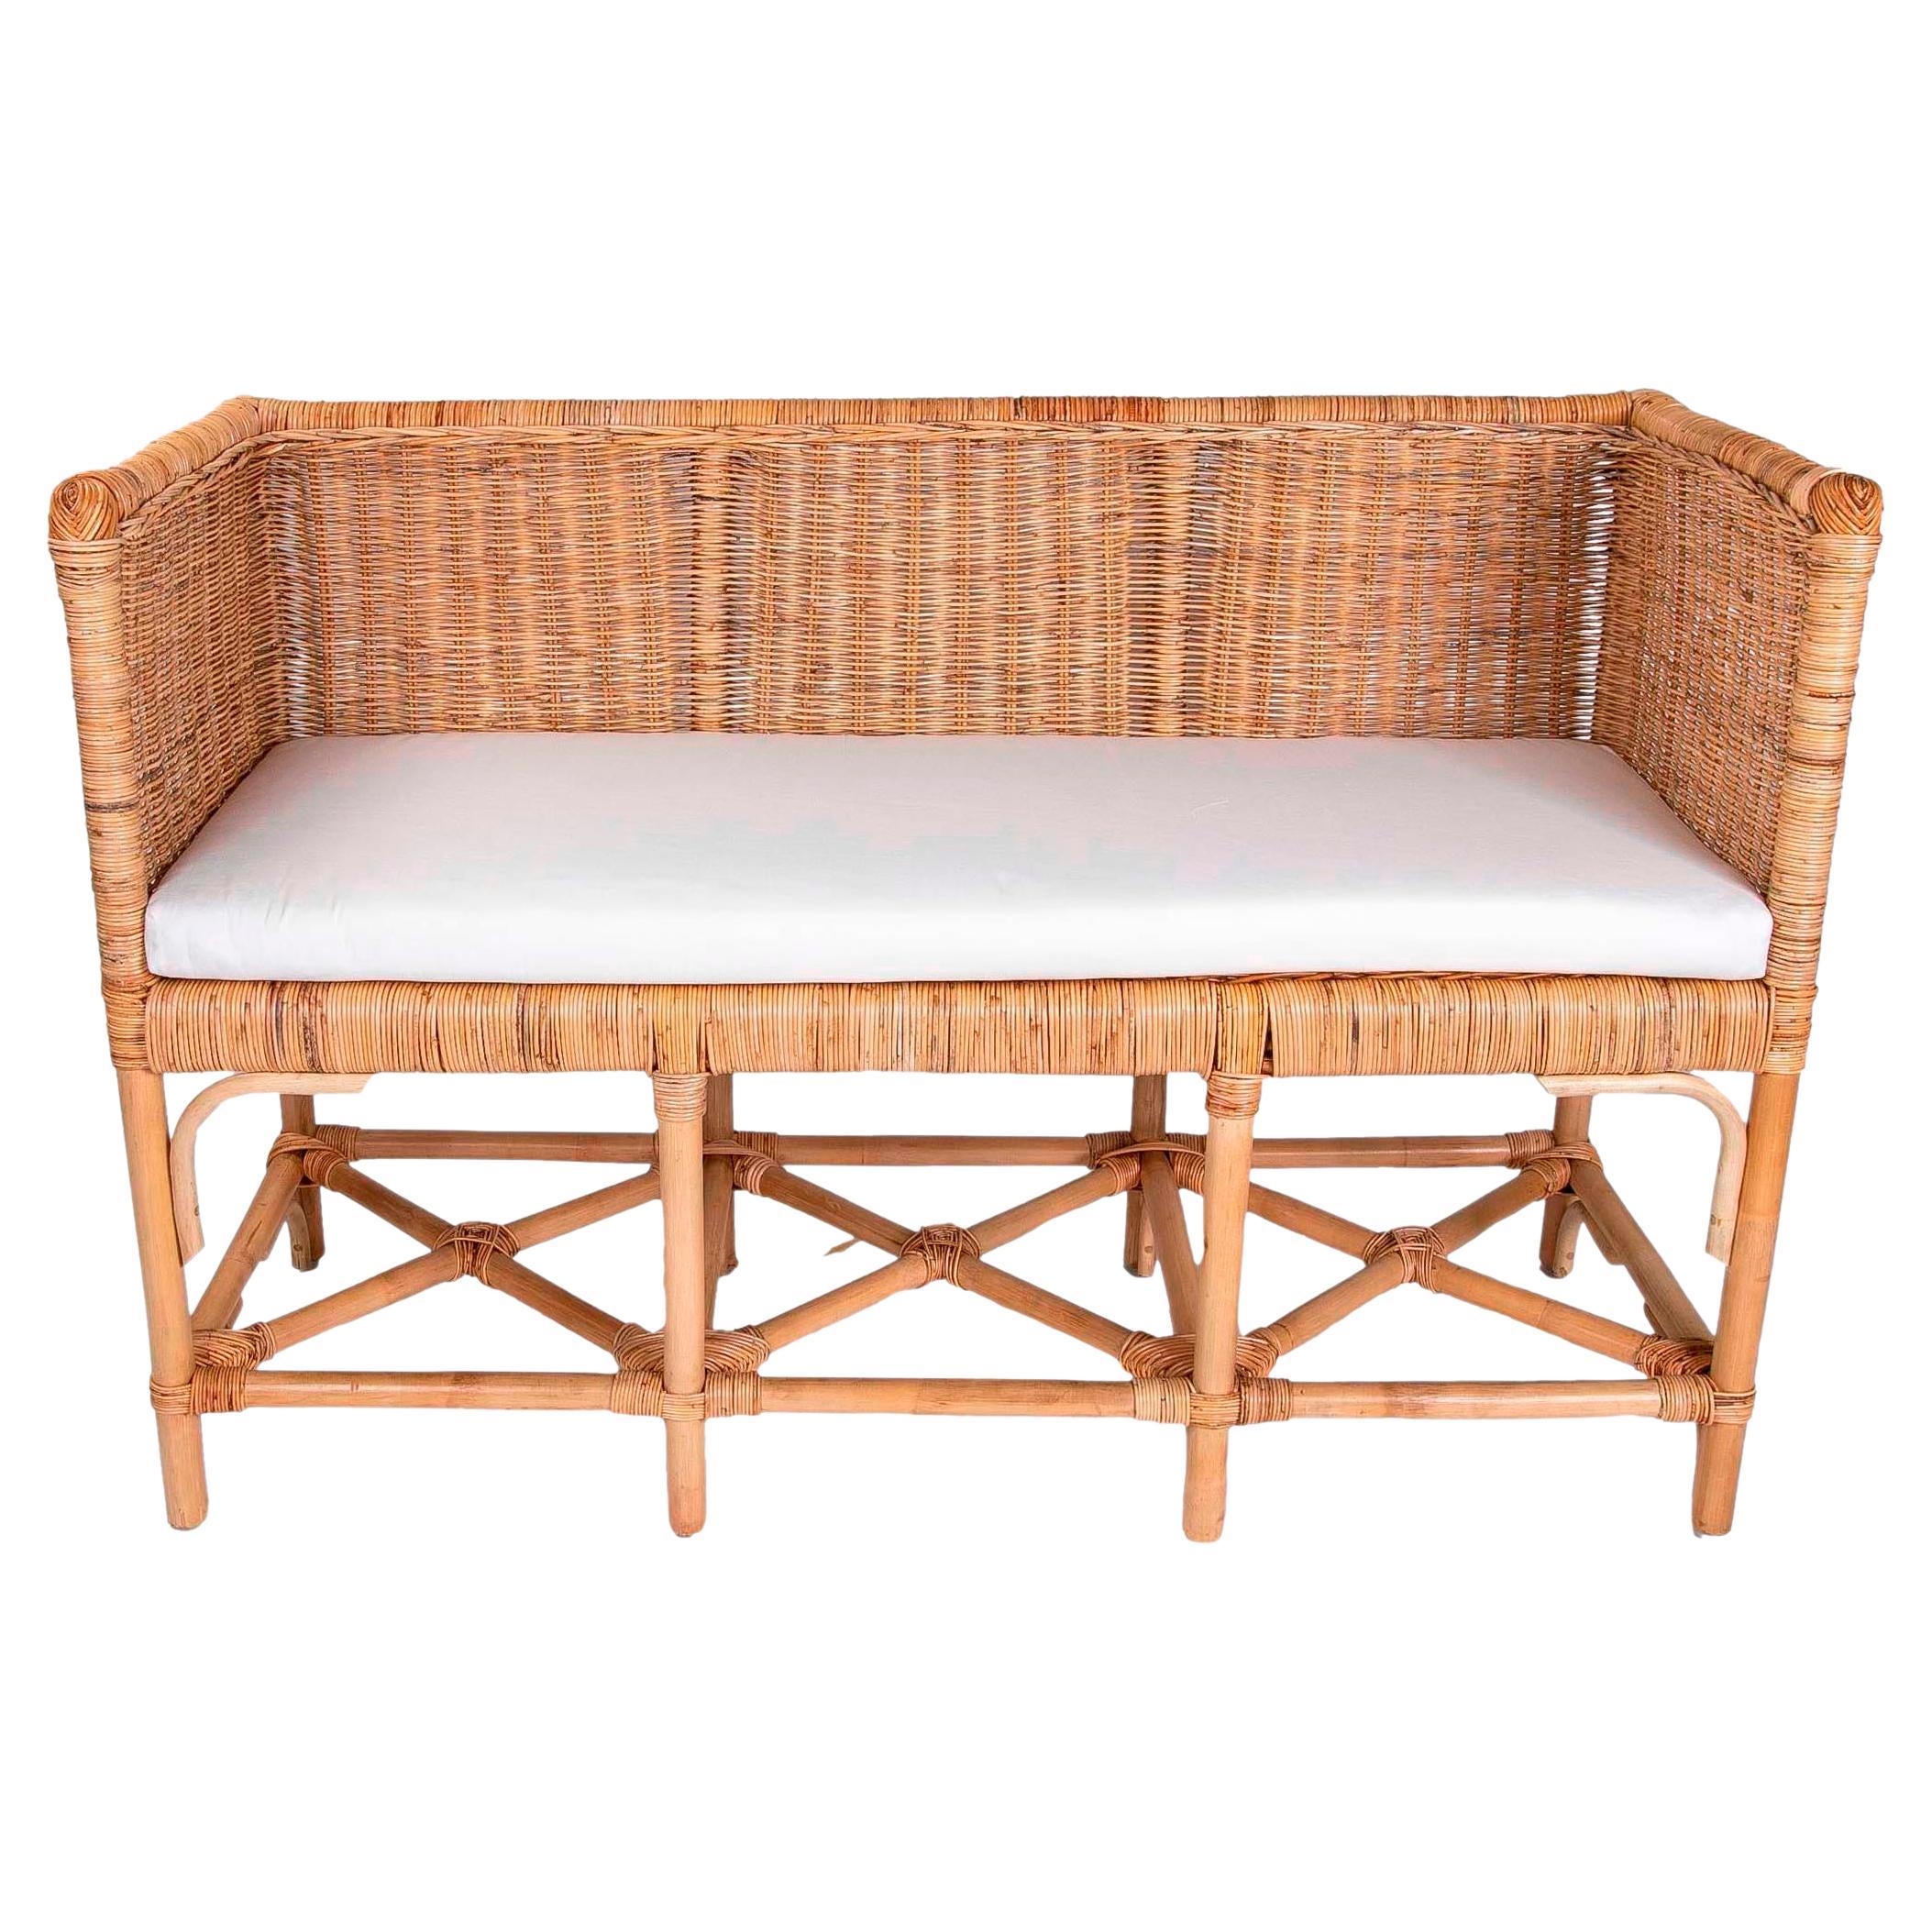 Handmade Rattan Bench with Straight Arms and Backrest